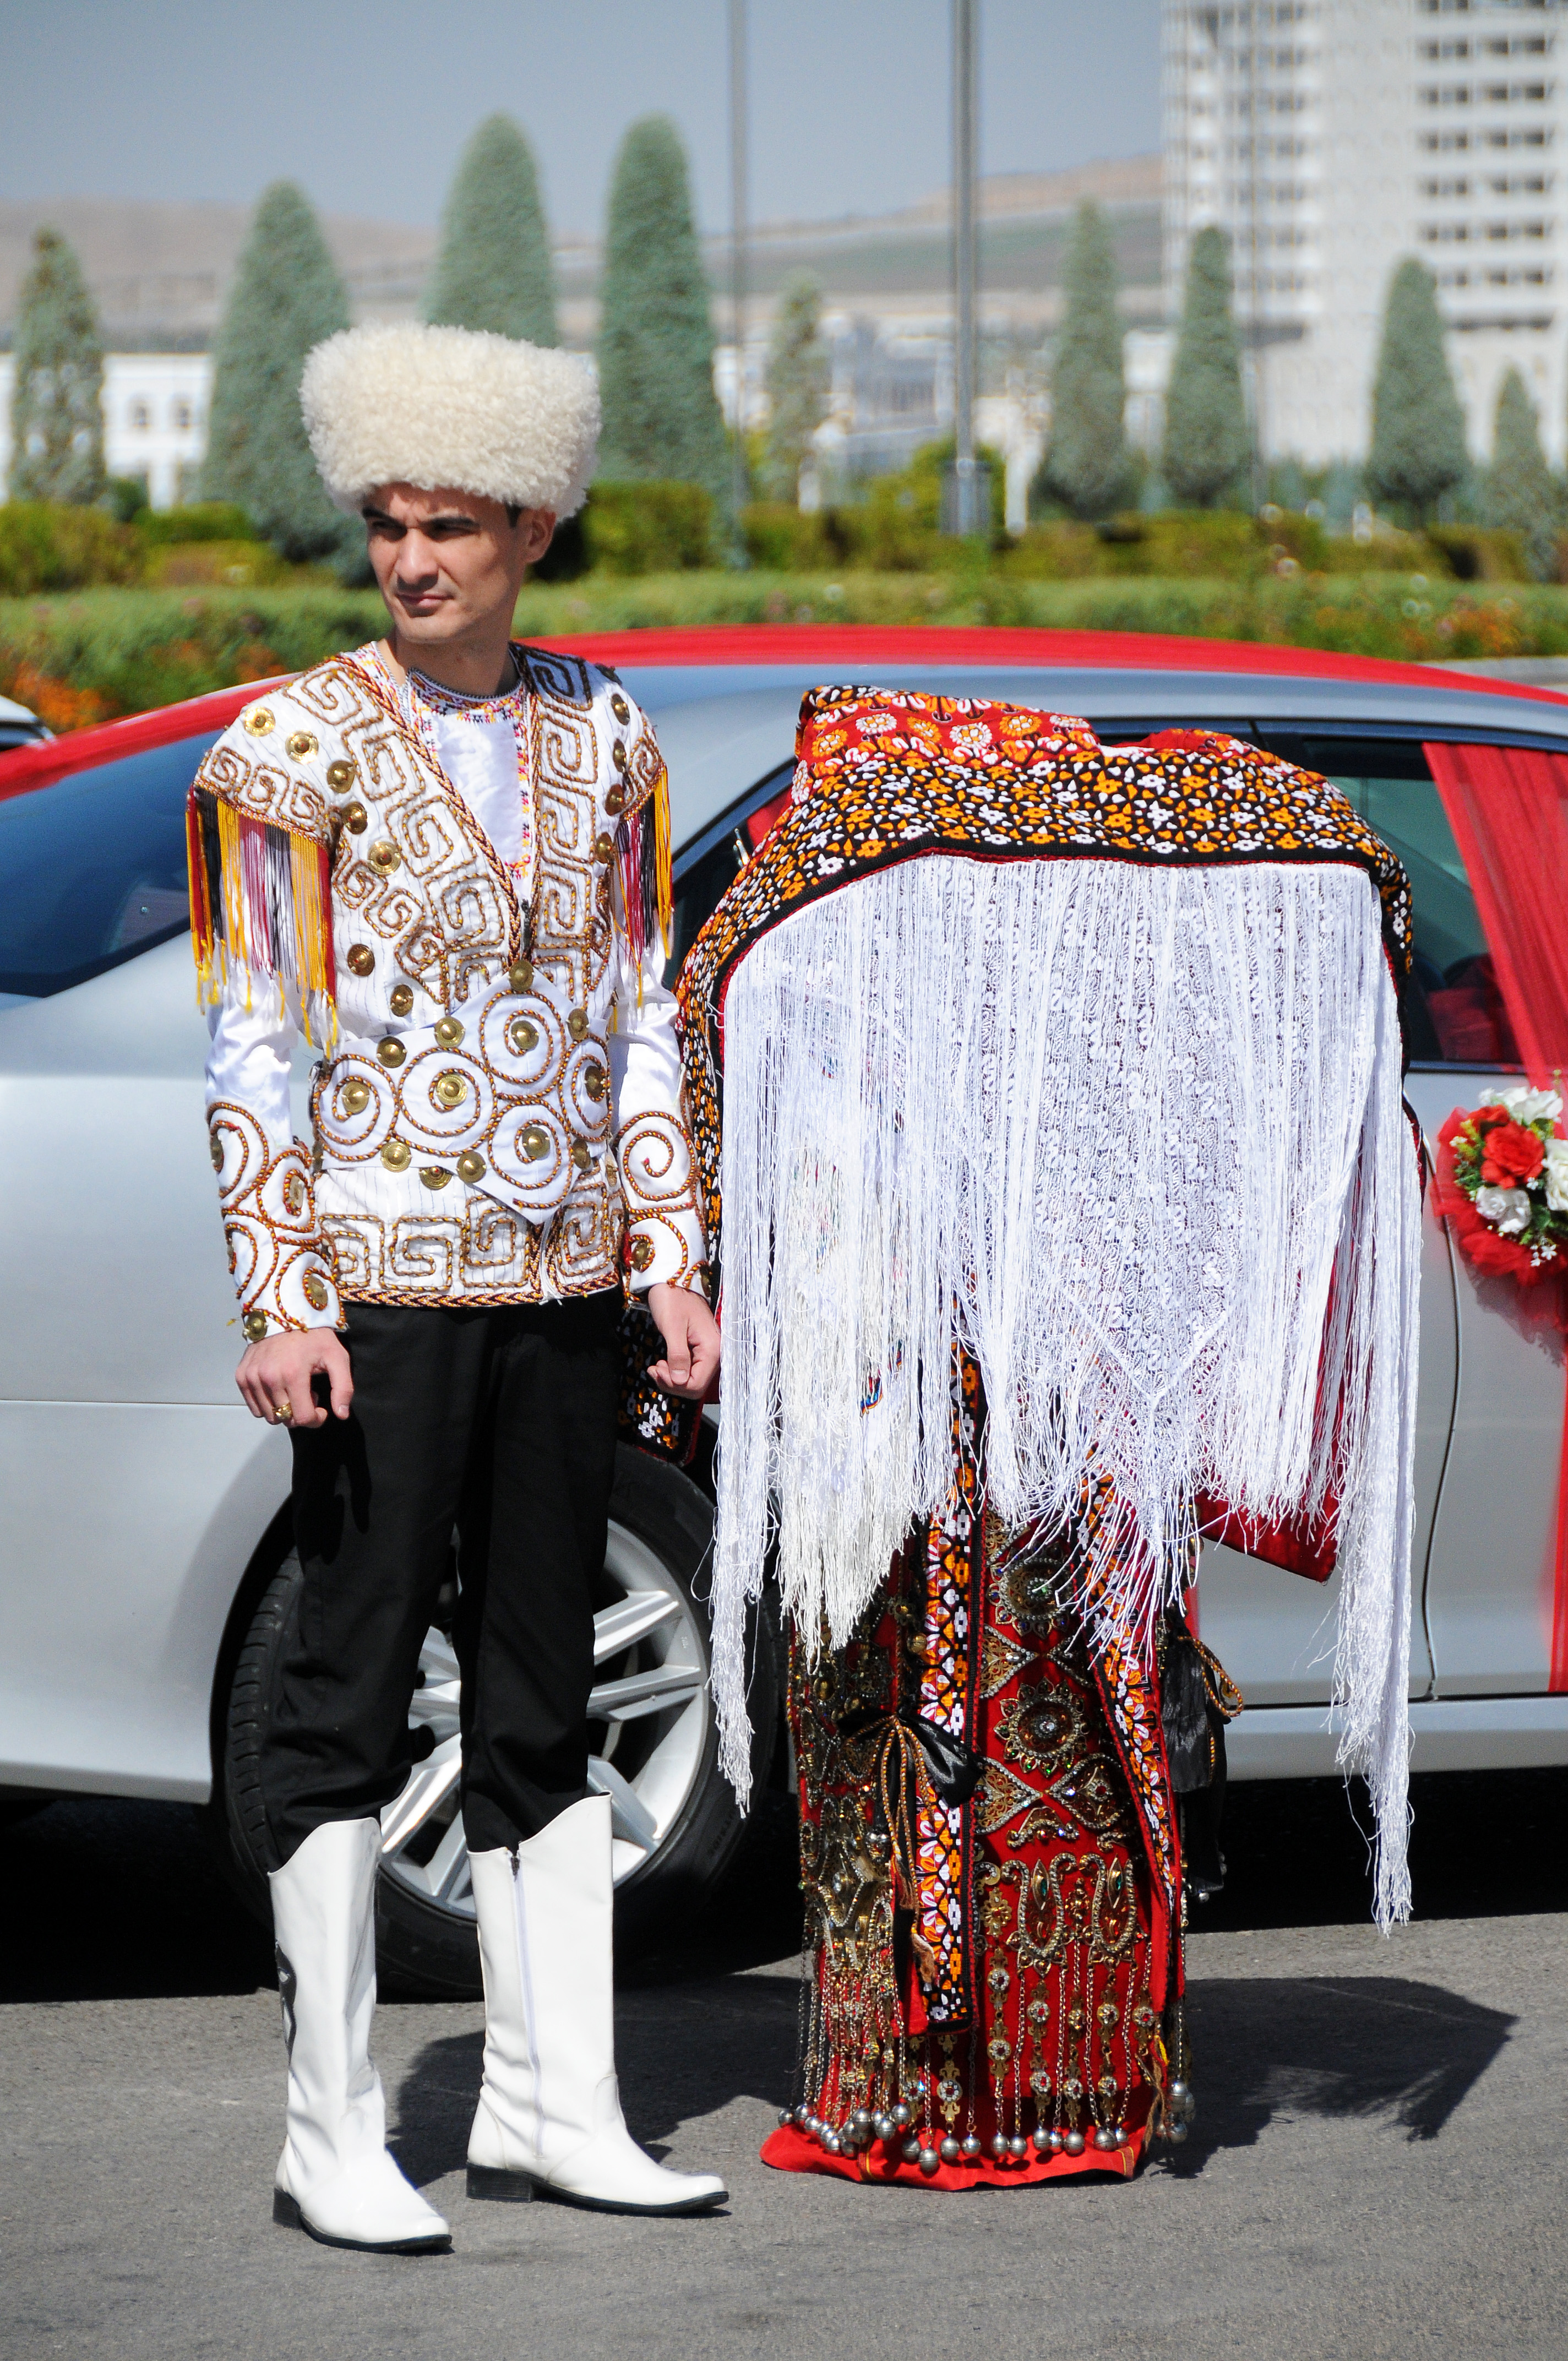 Anjci All Over | Odd Facts about Turkmenistan